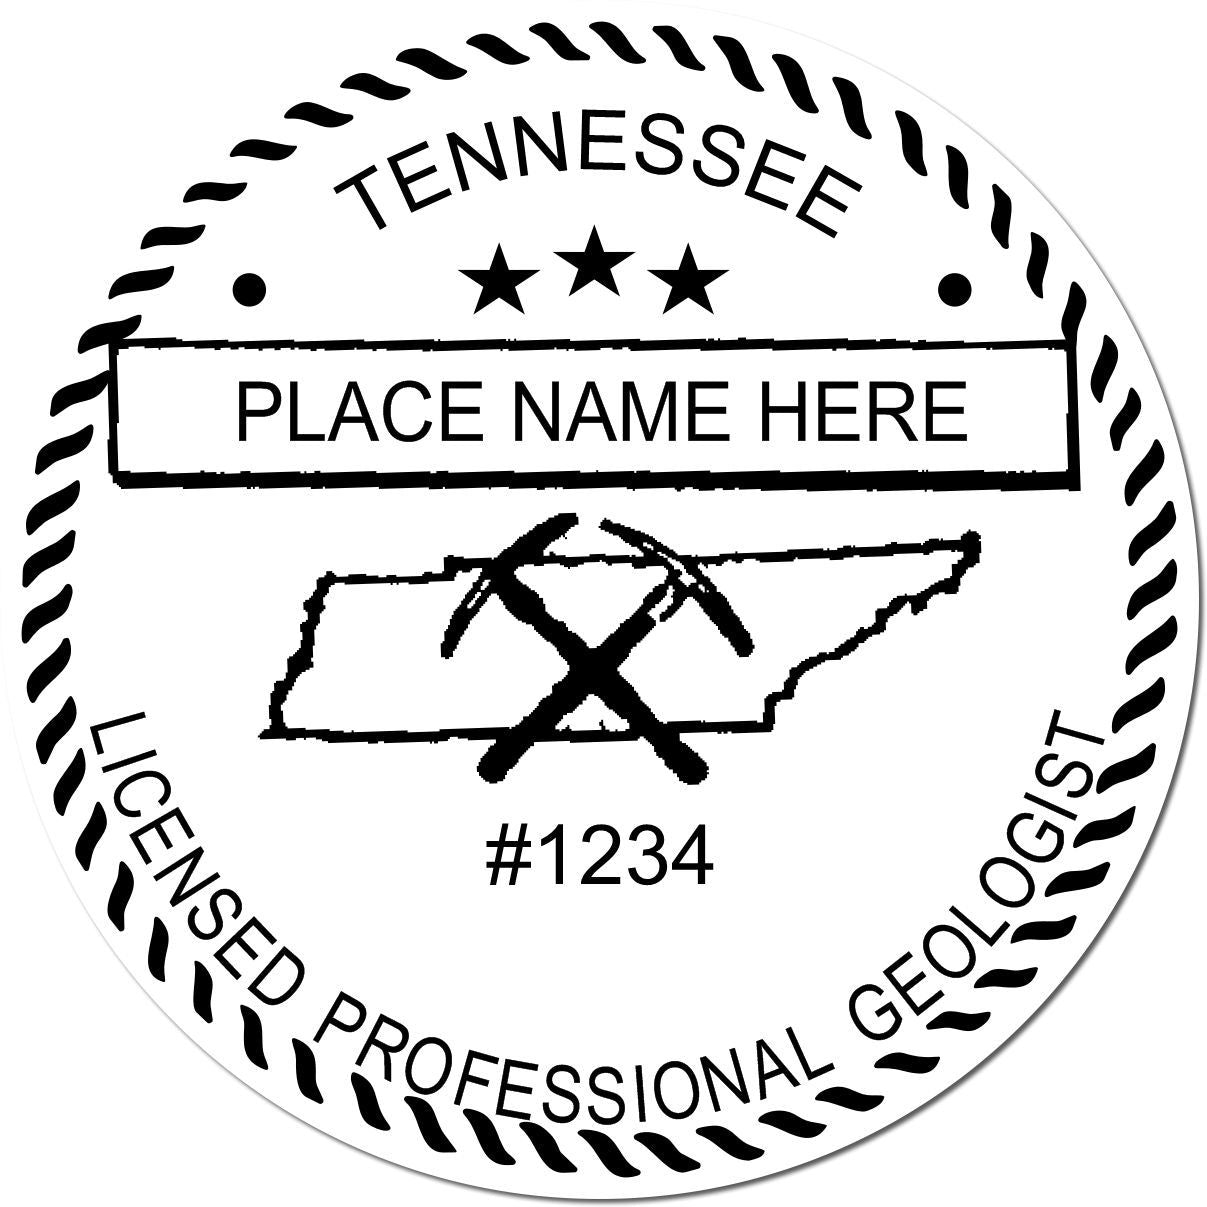 This paper is stamped with a sample imprint of the Tennessee Professional Geologist Seal Stamp, signifying its quality and reliability.